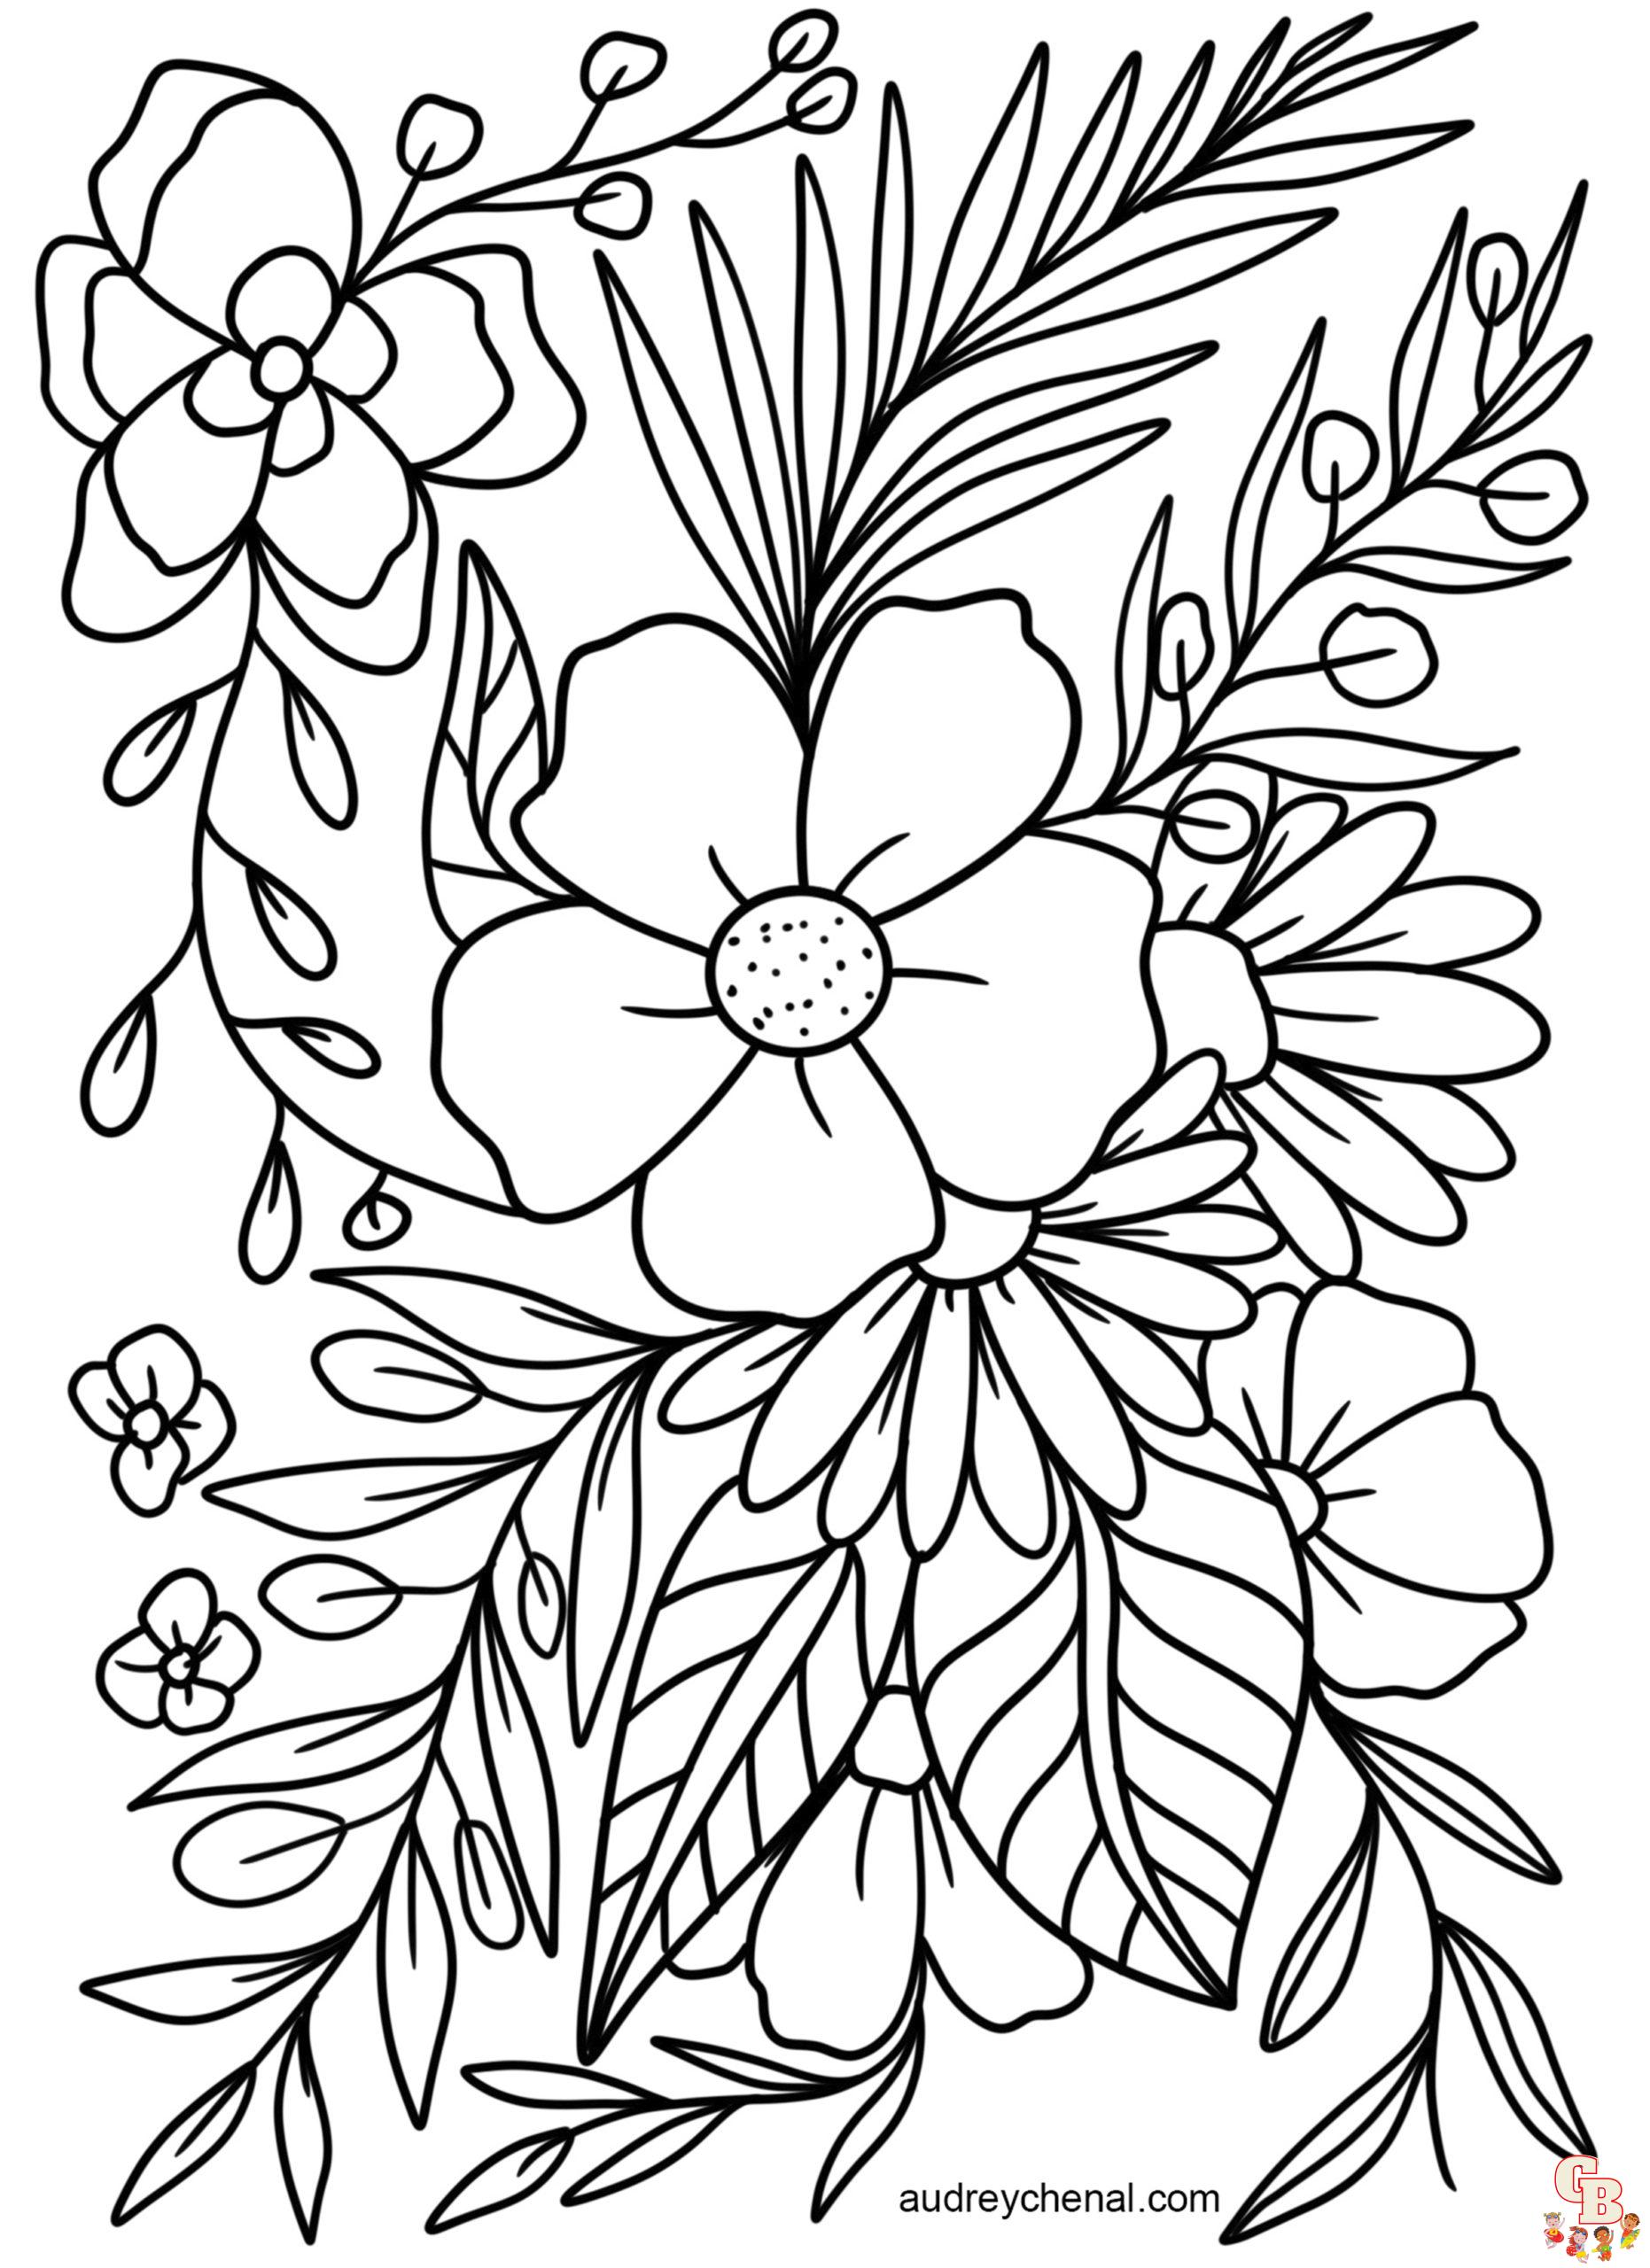 Digital Coloring Pages 4